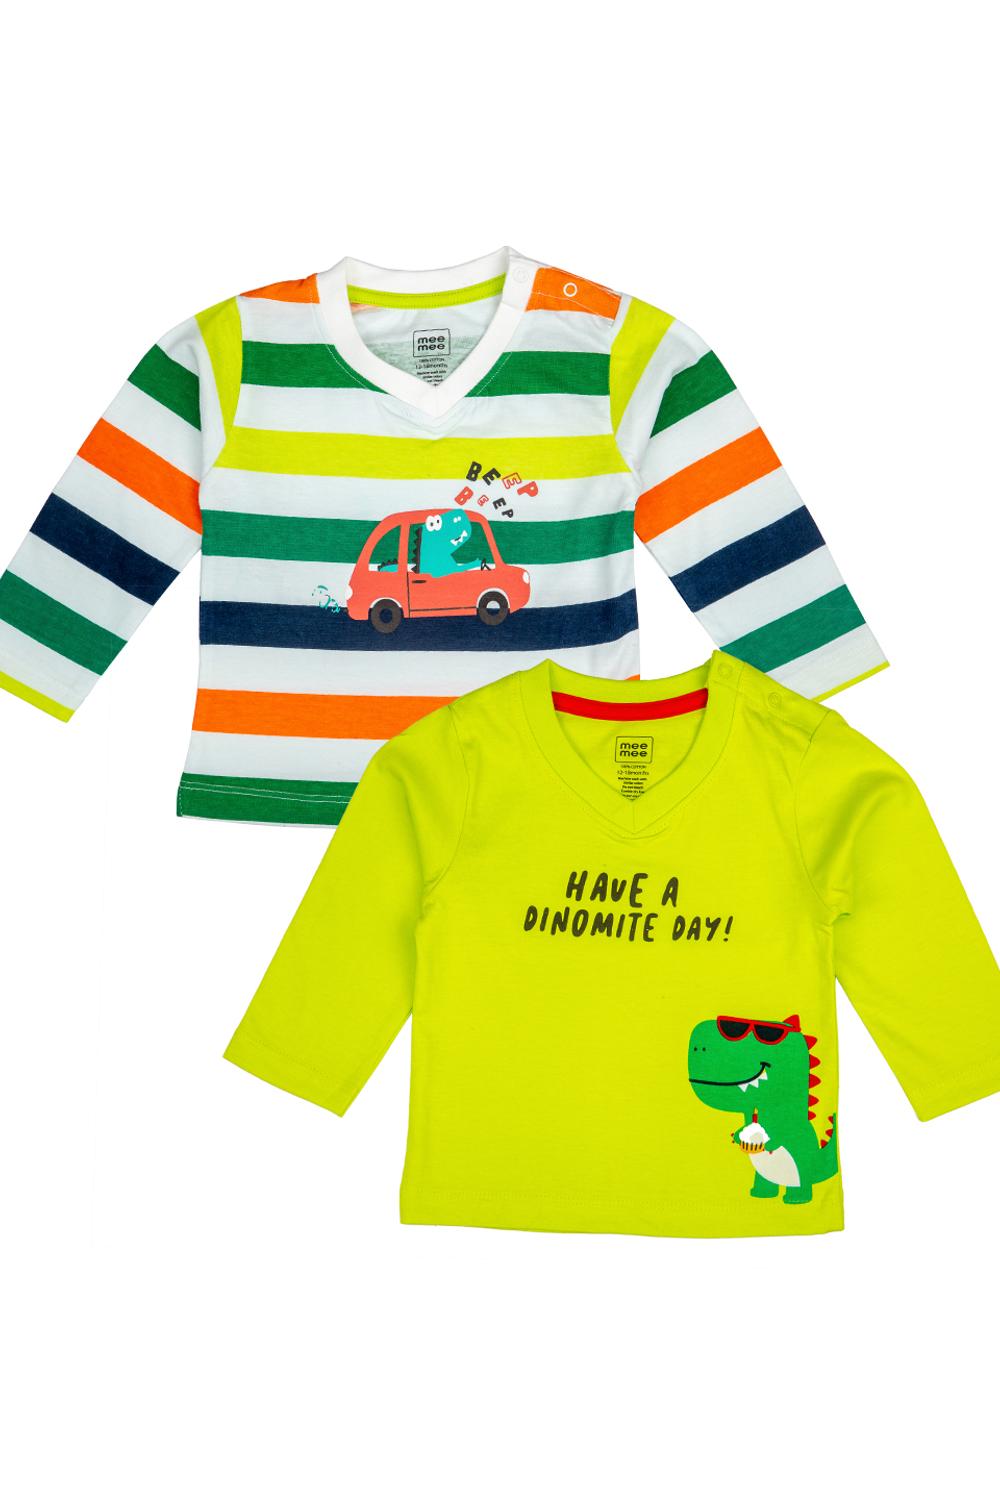 Mee Mee Boys Pack Of 2 T-shirt – Lime & Multi Stri